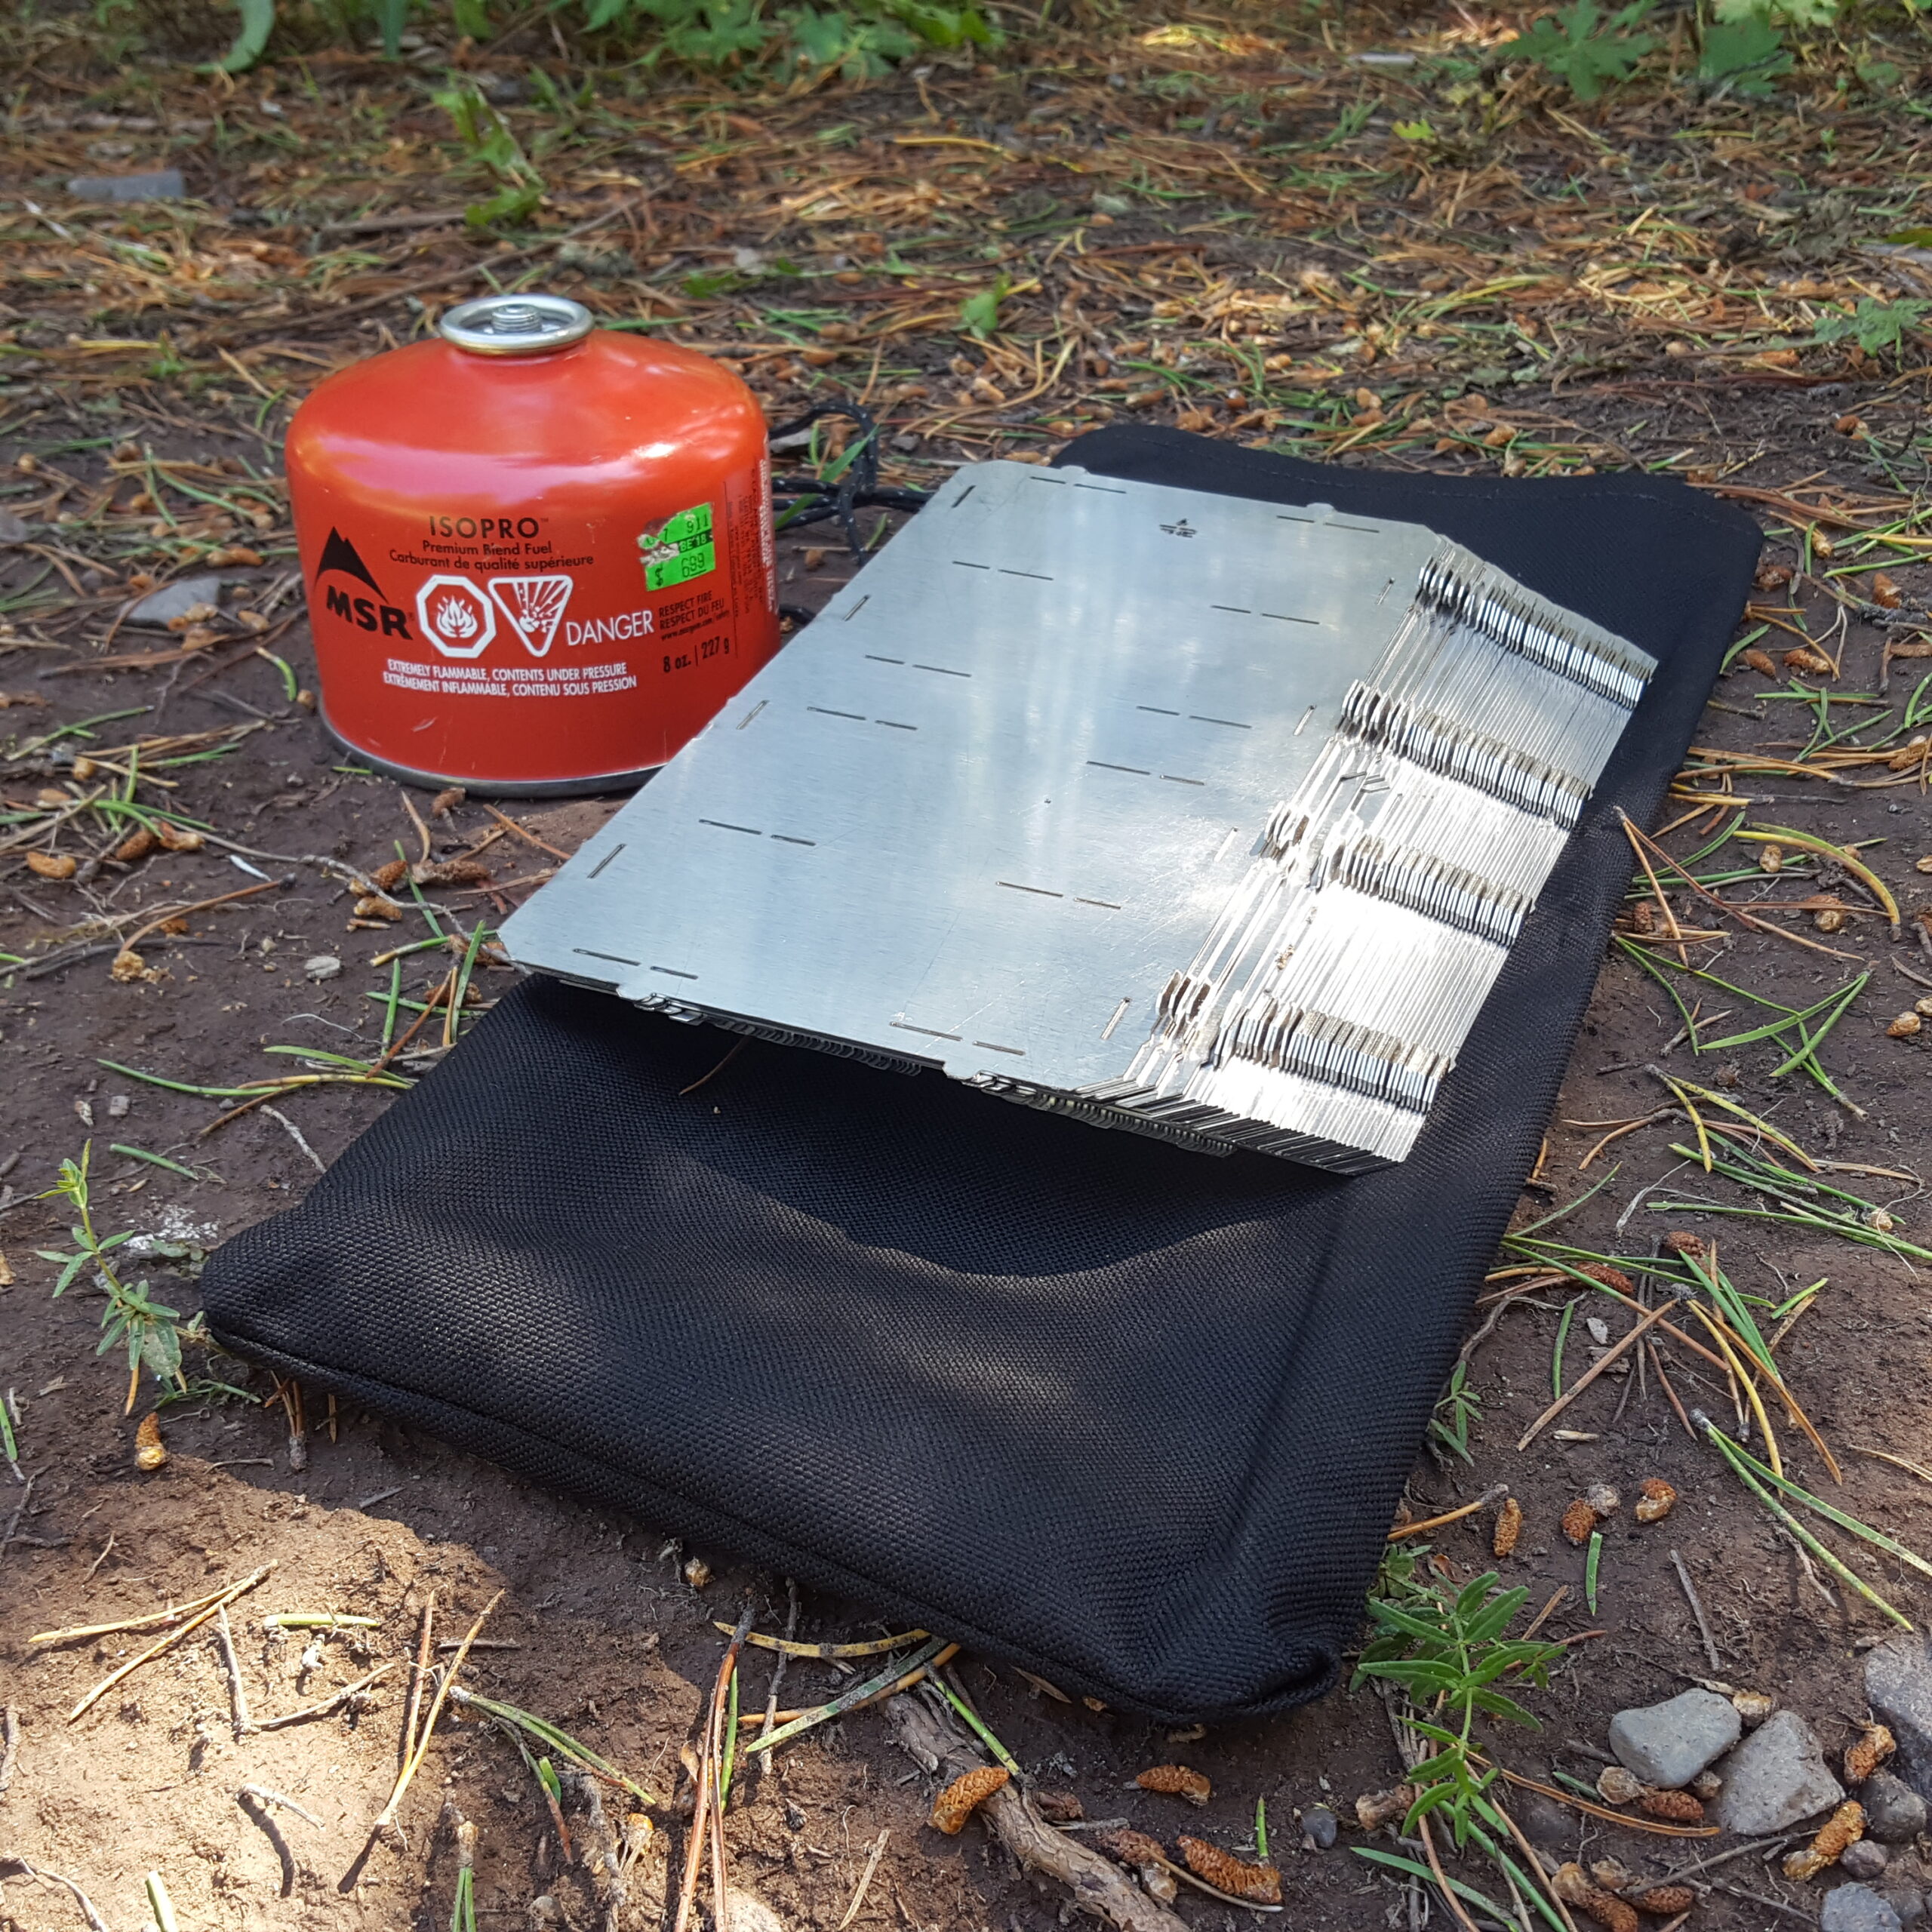 A Survival Stove With Never Seen Before Capabilities